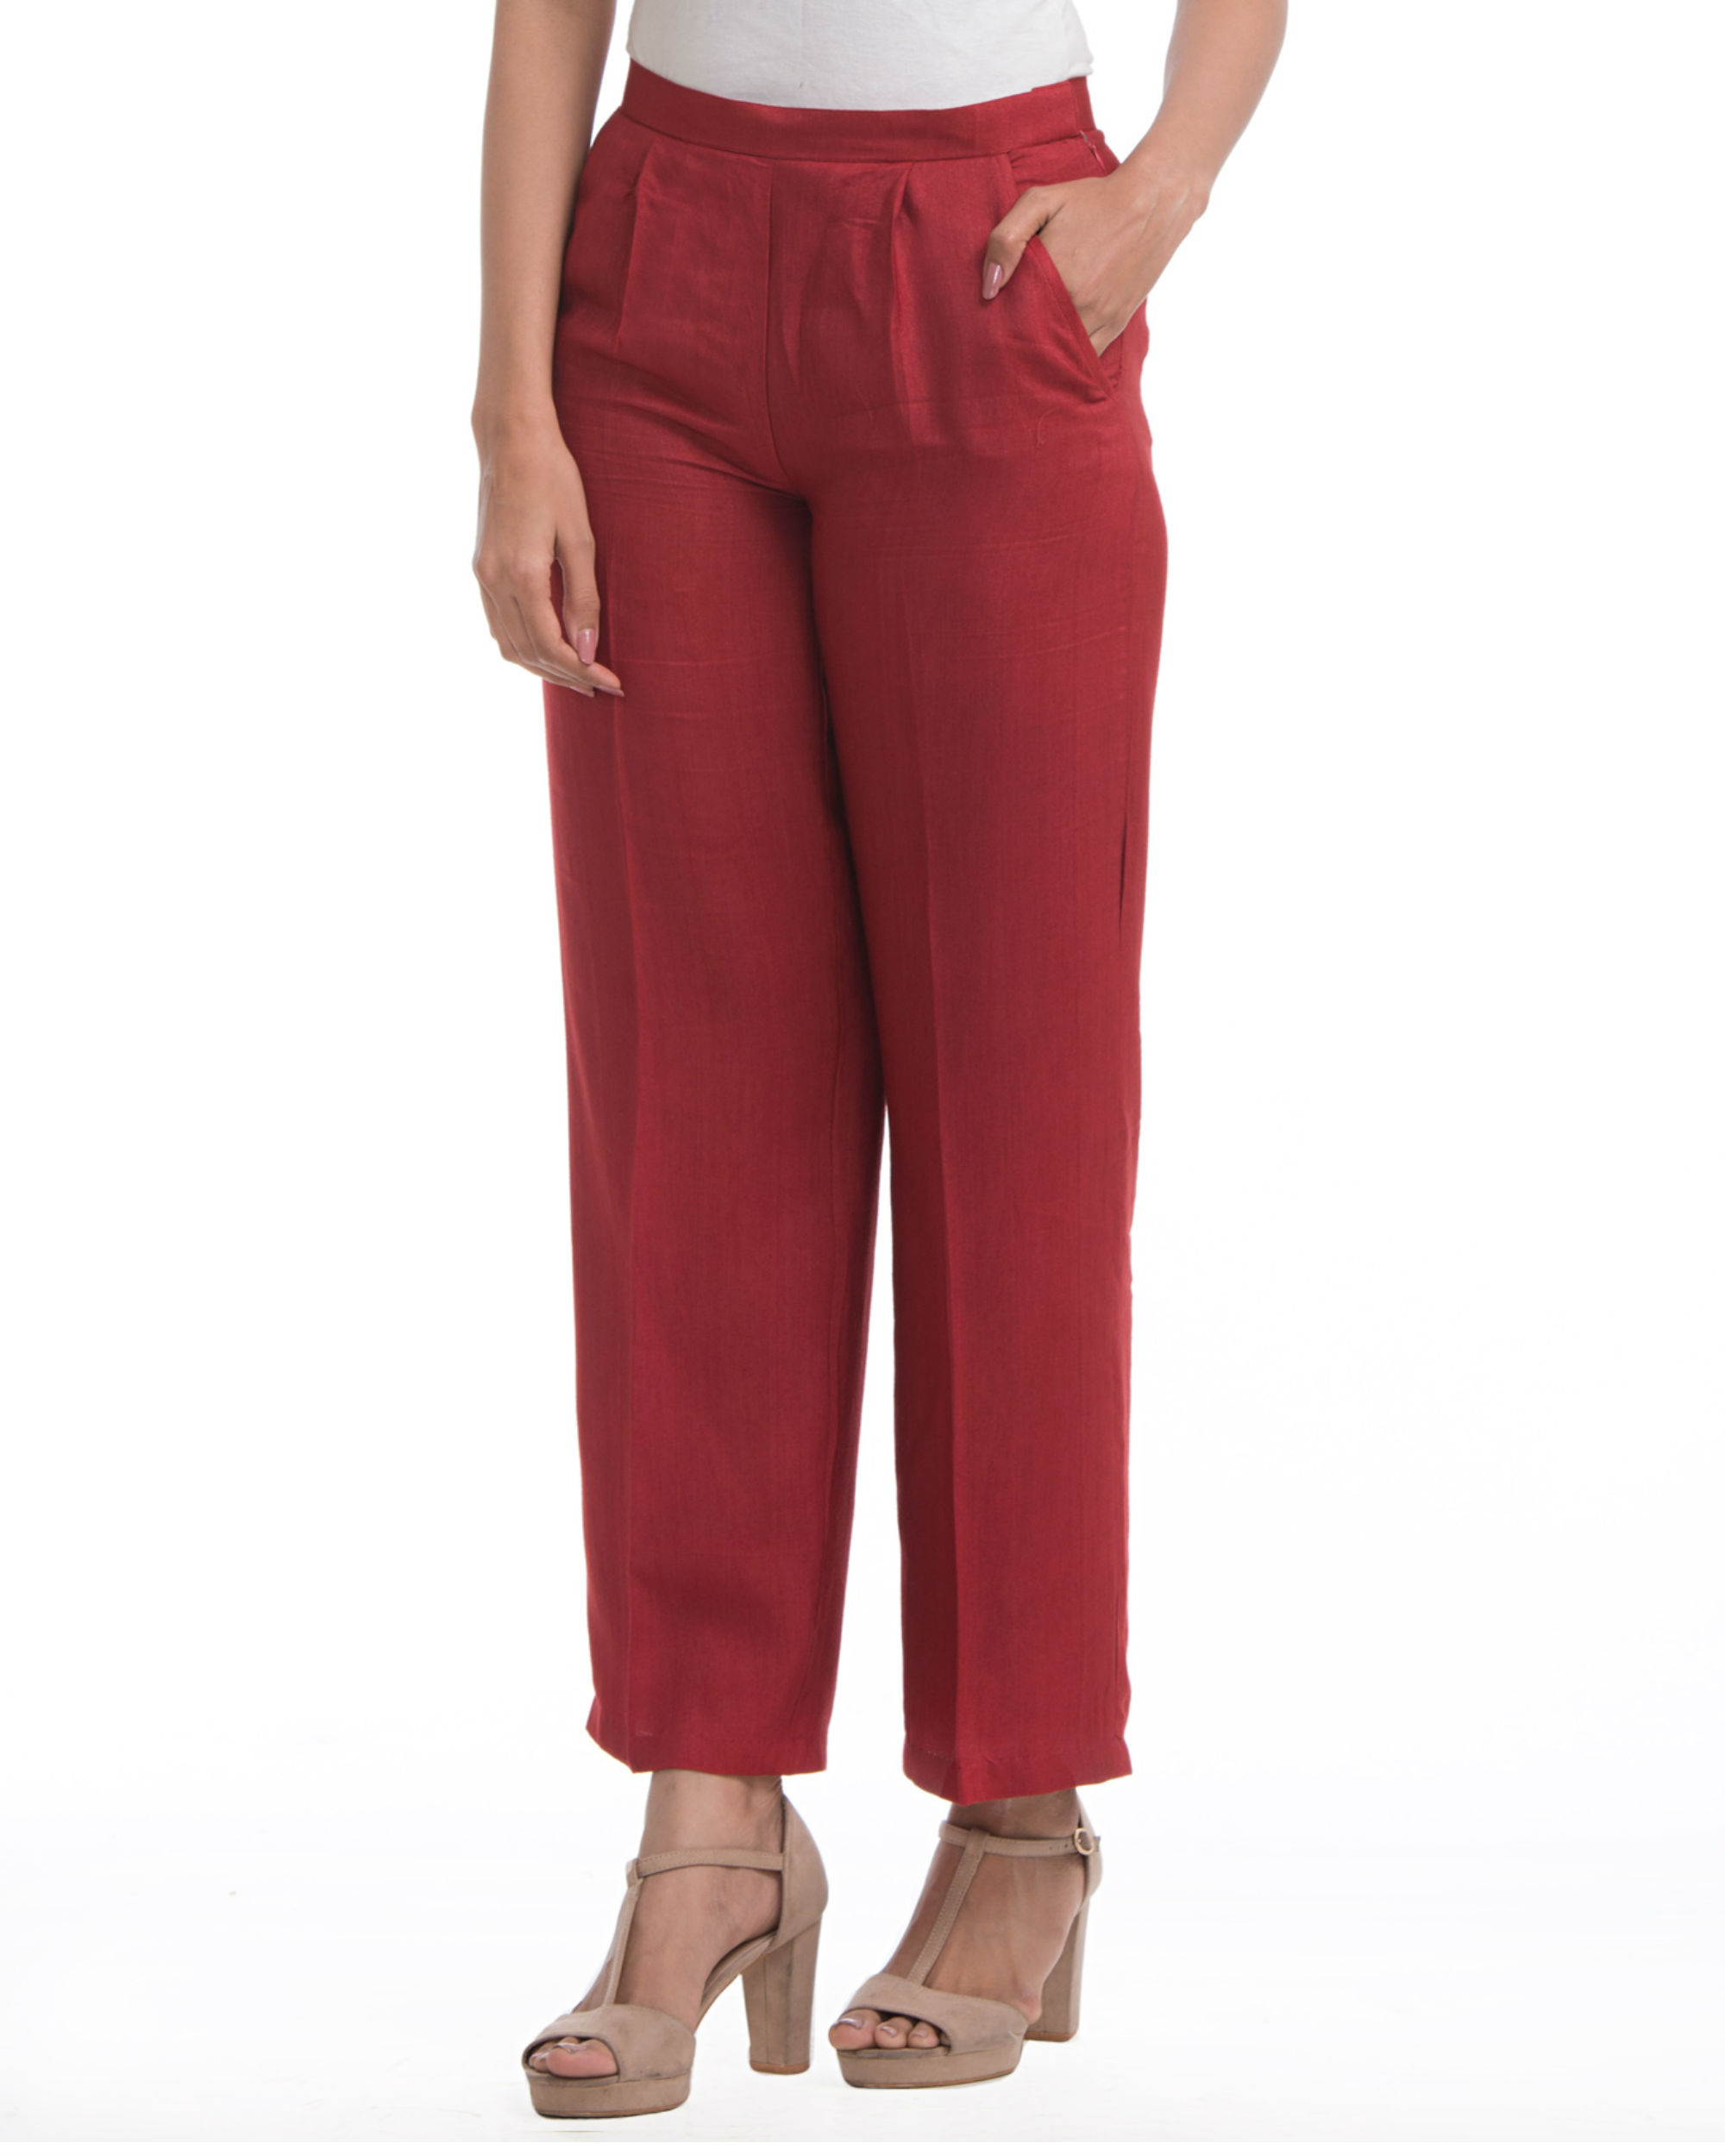 Maroon pleated pants by ANS | The Secret Label